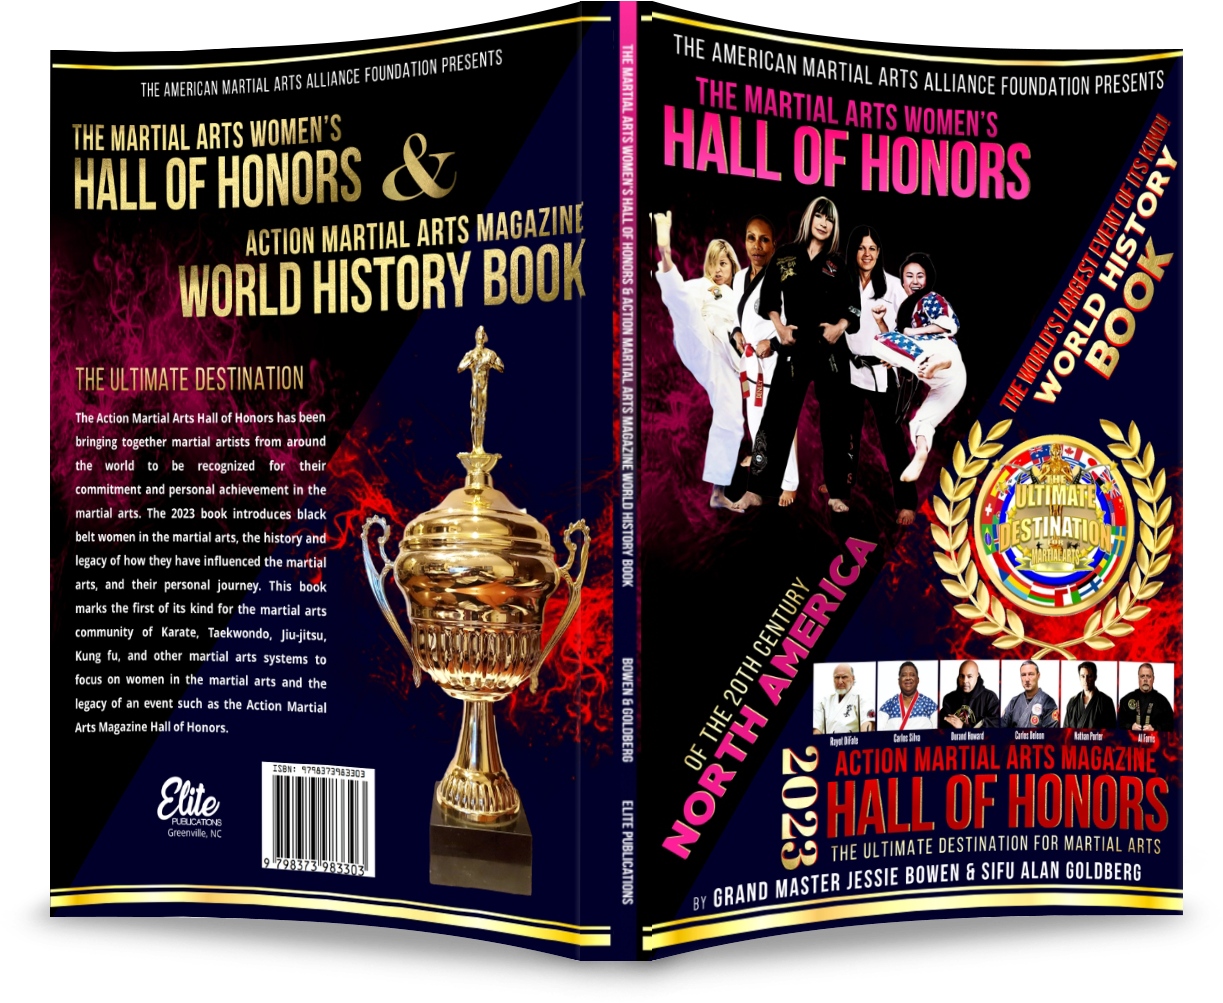 The Martial Arts Women's Hall of Honors and Action Martial Arts Magazine World History Book